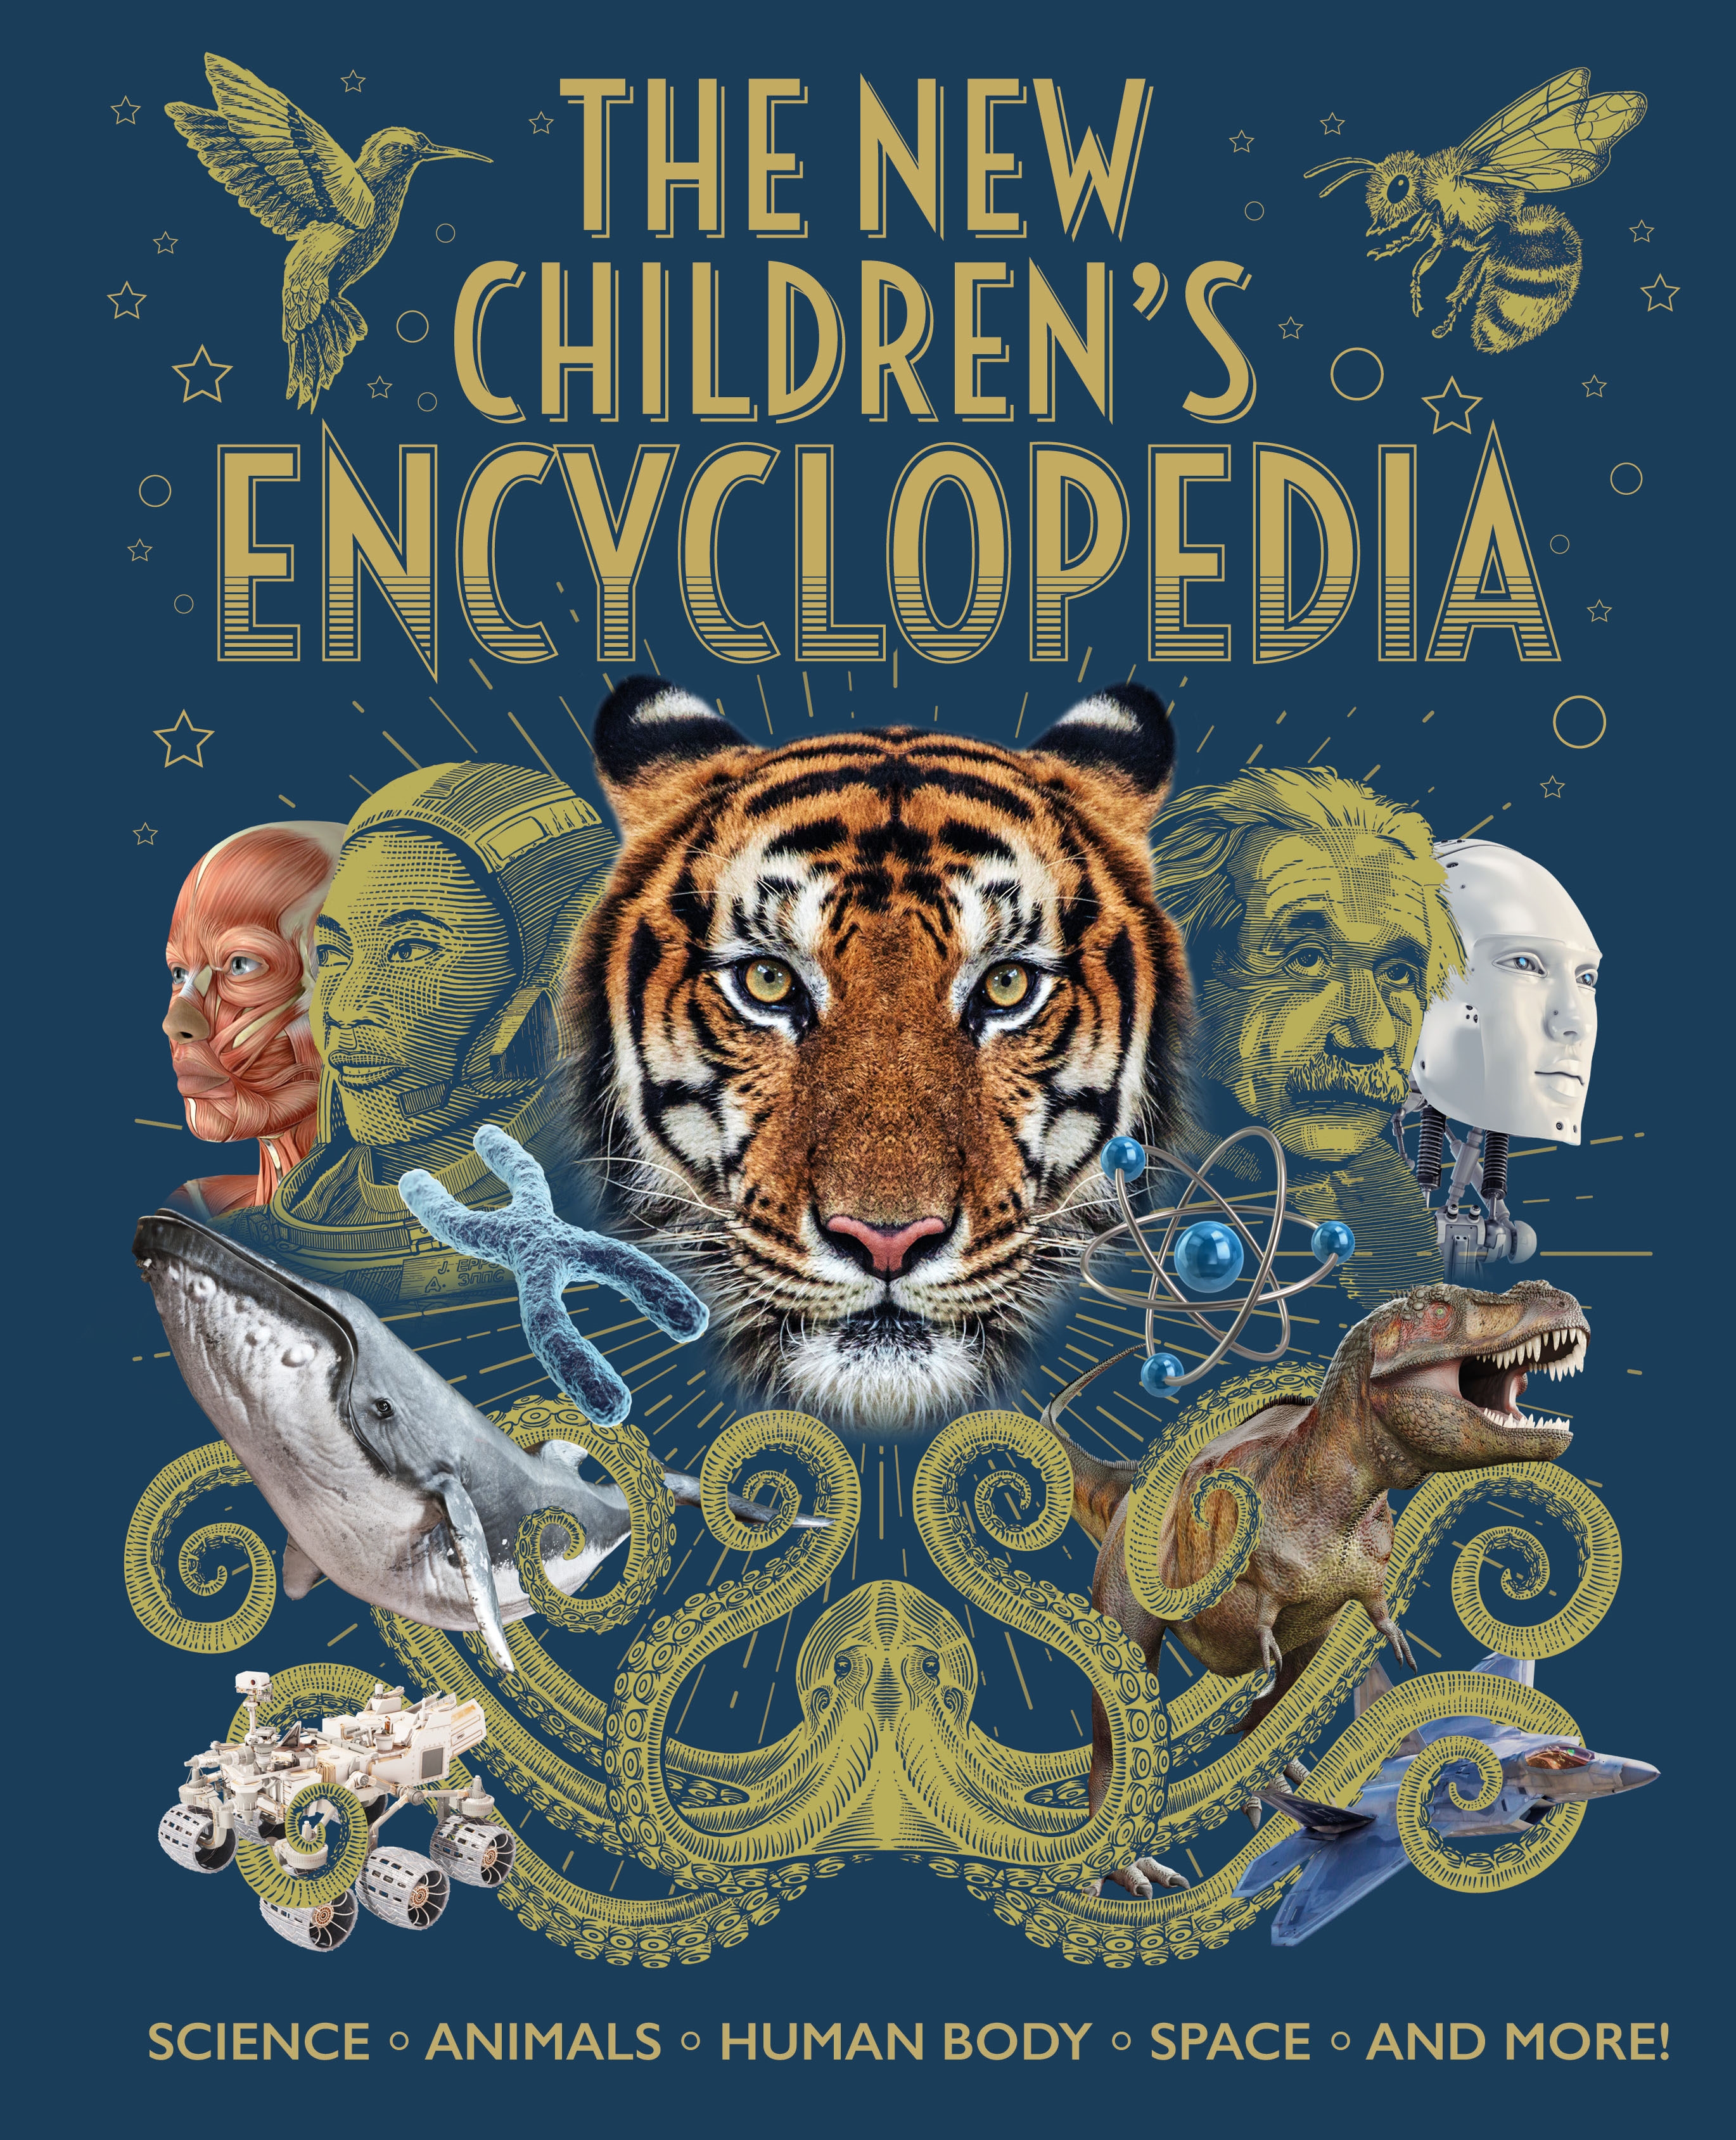 The New Children's Encyclopedia : Science, Animals, Human Body, Space, and More! | Documentary